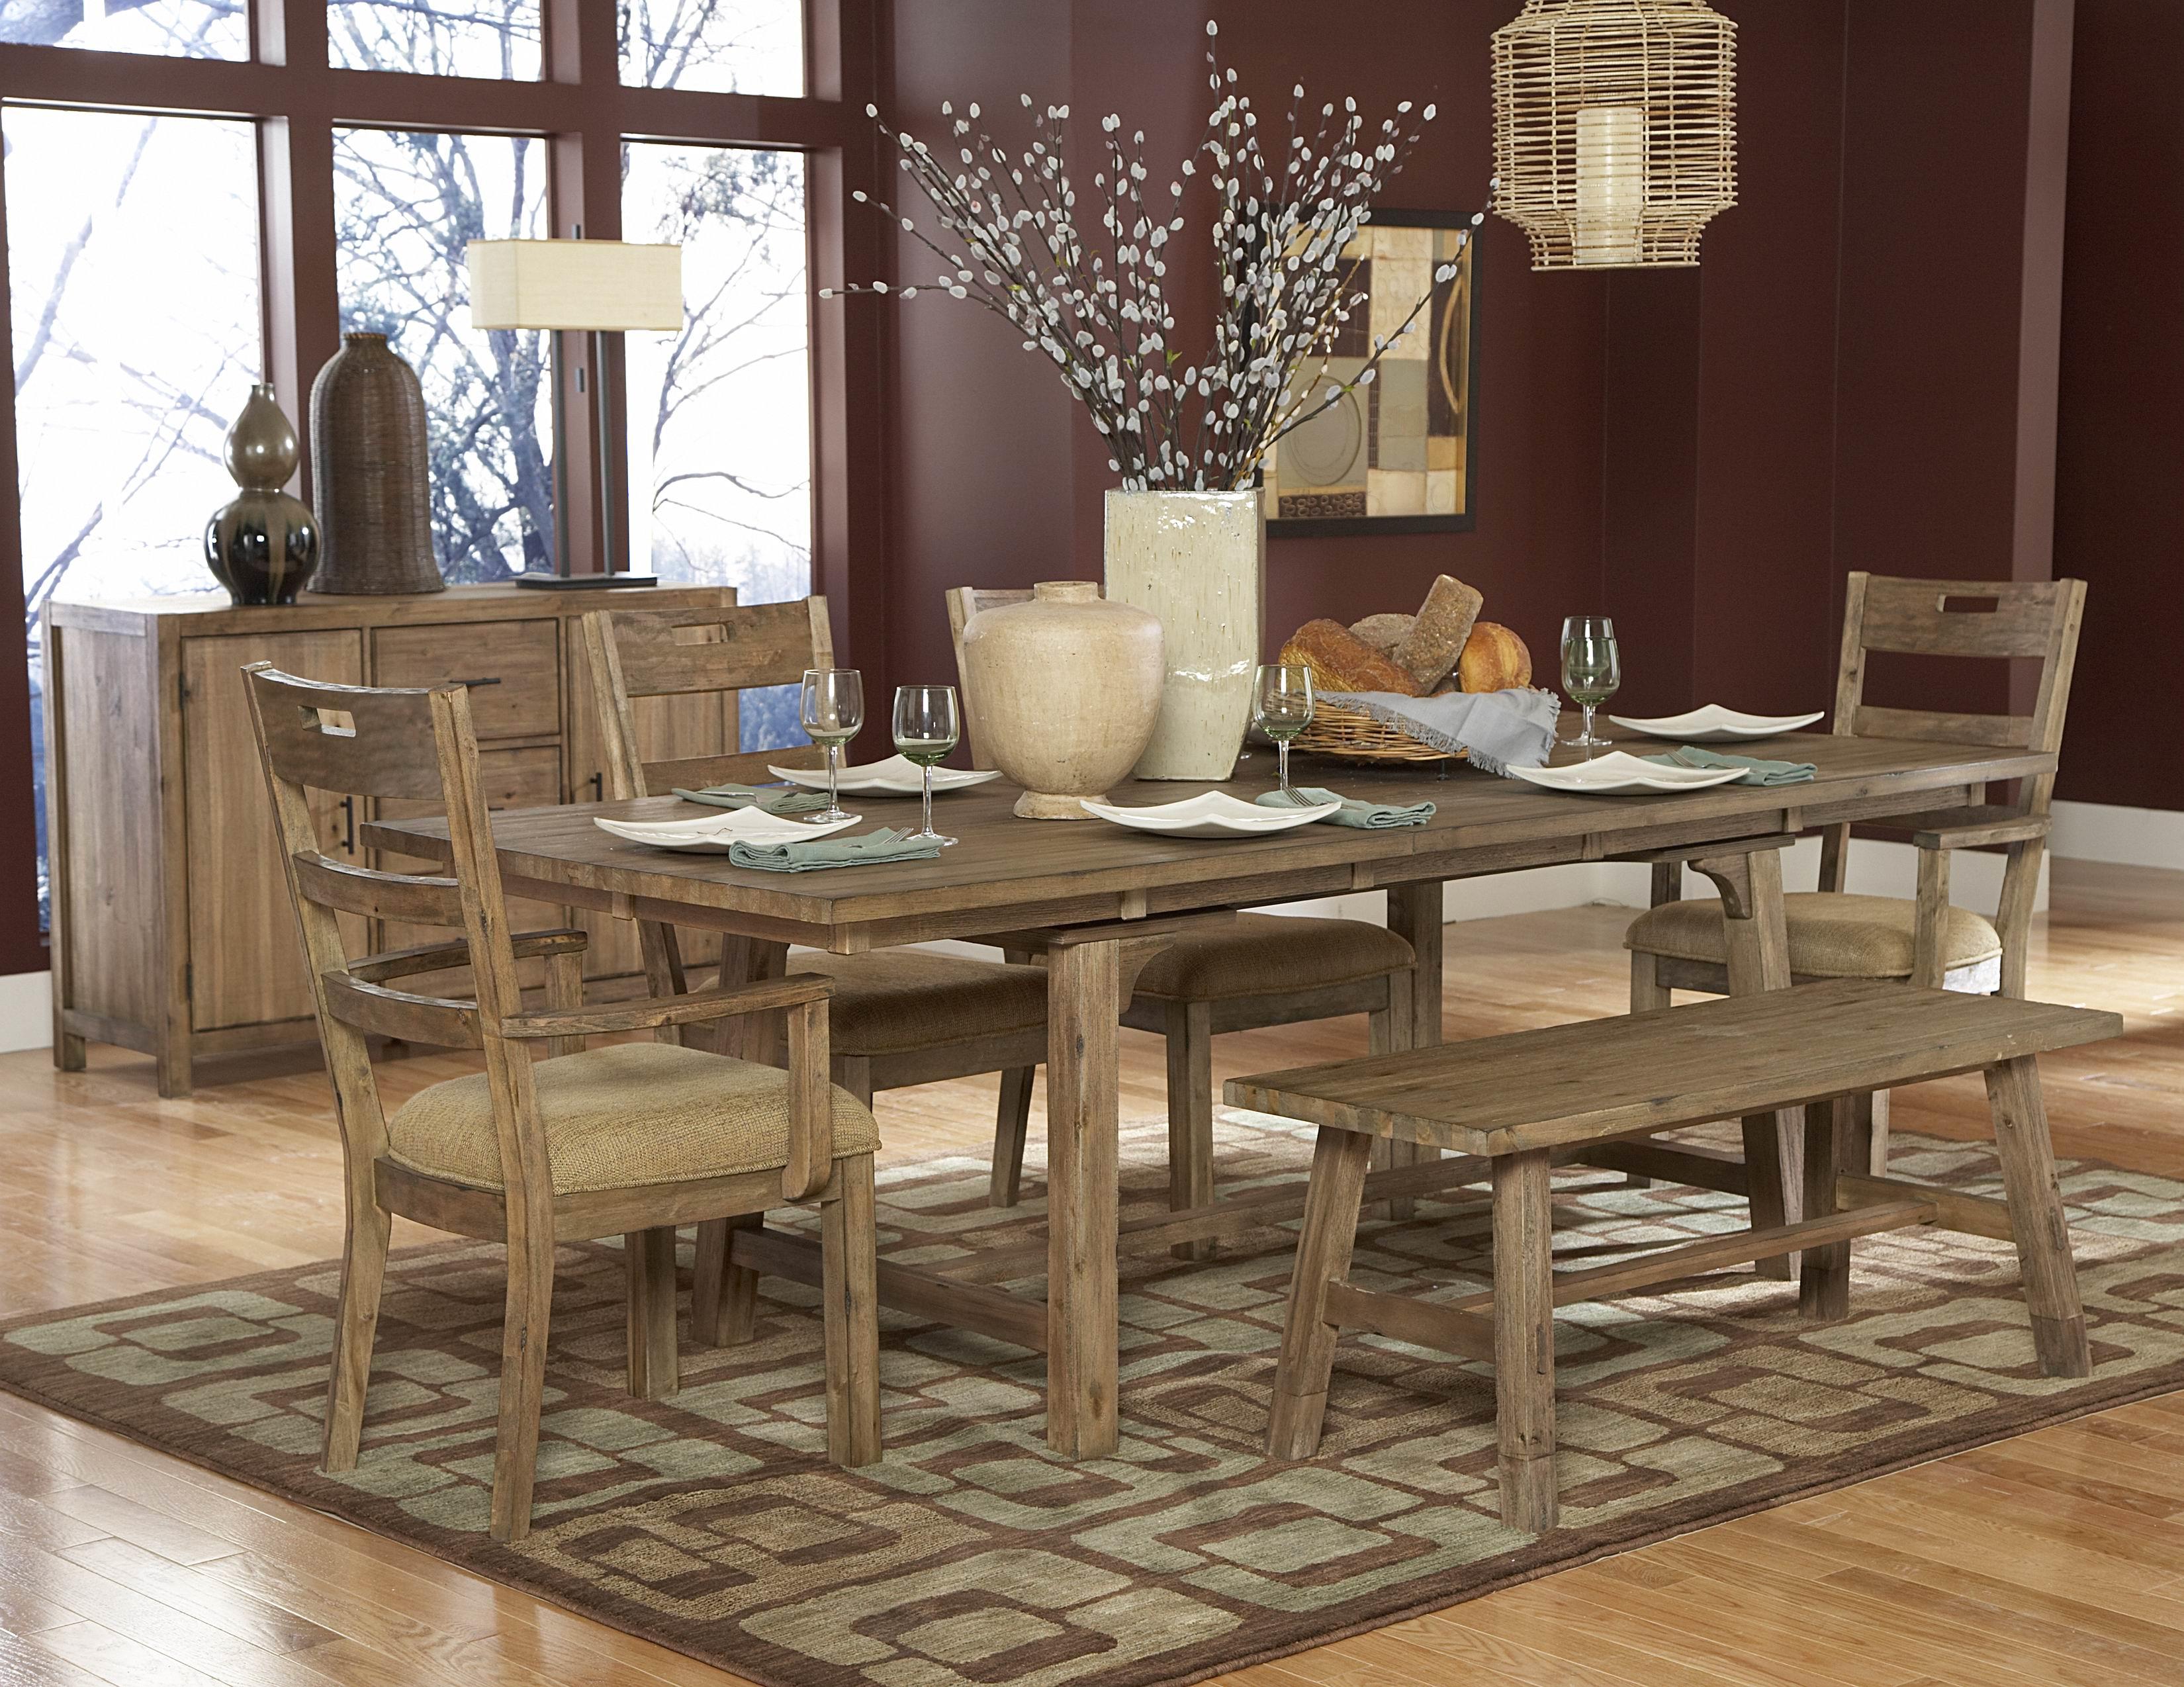 Modern Rustic Dining Room Table 